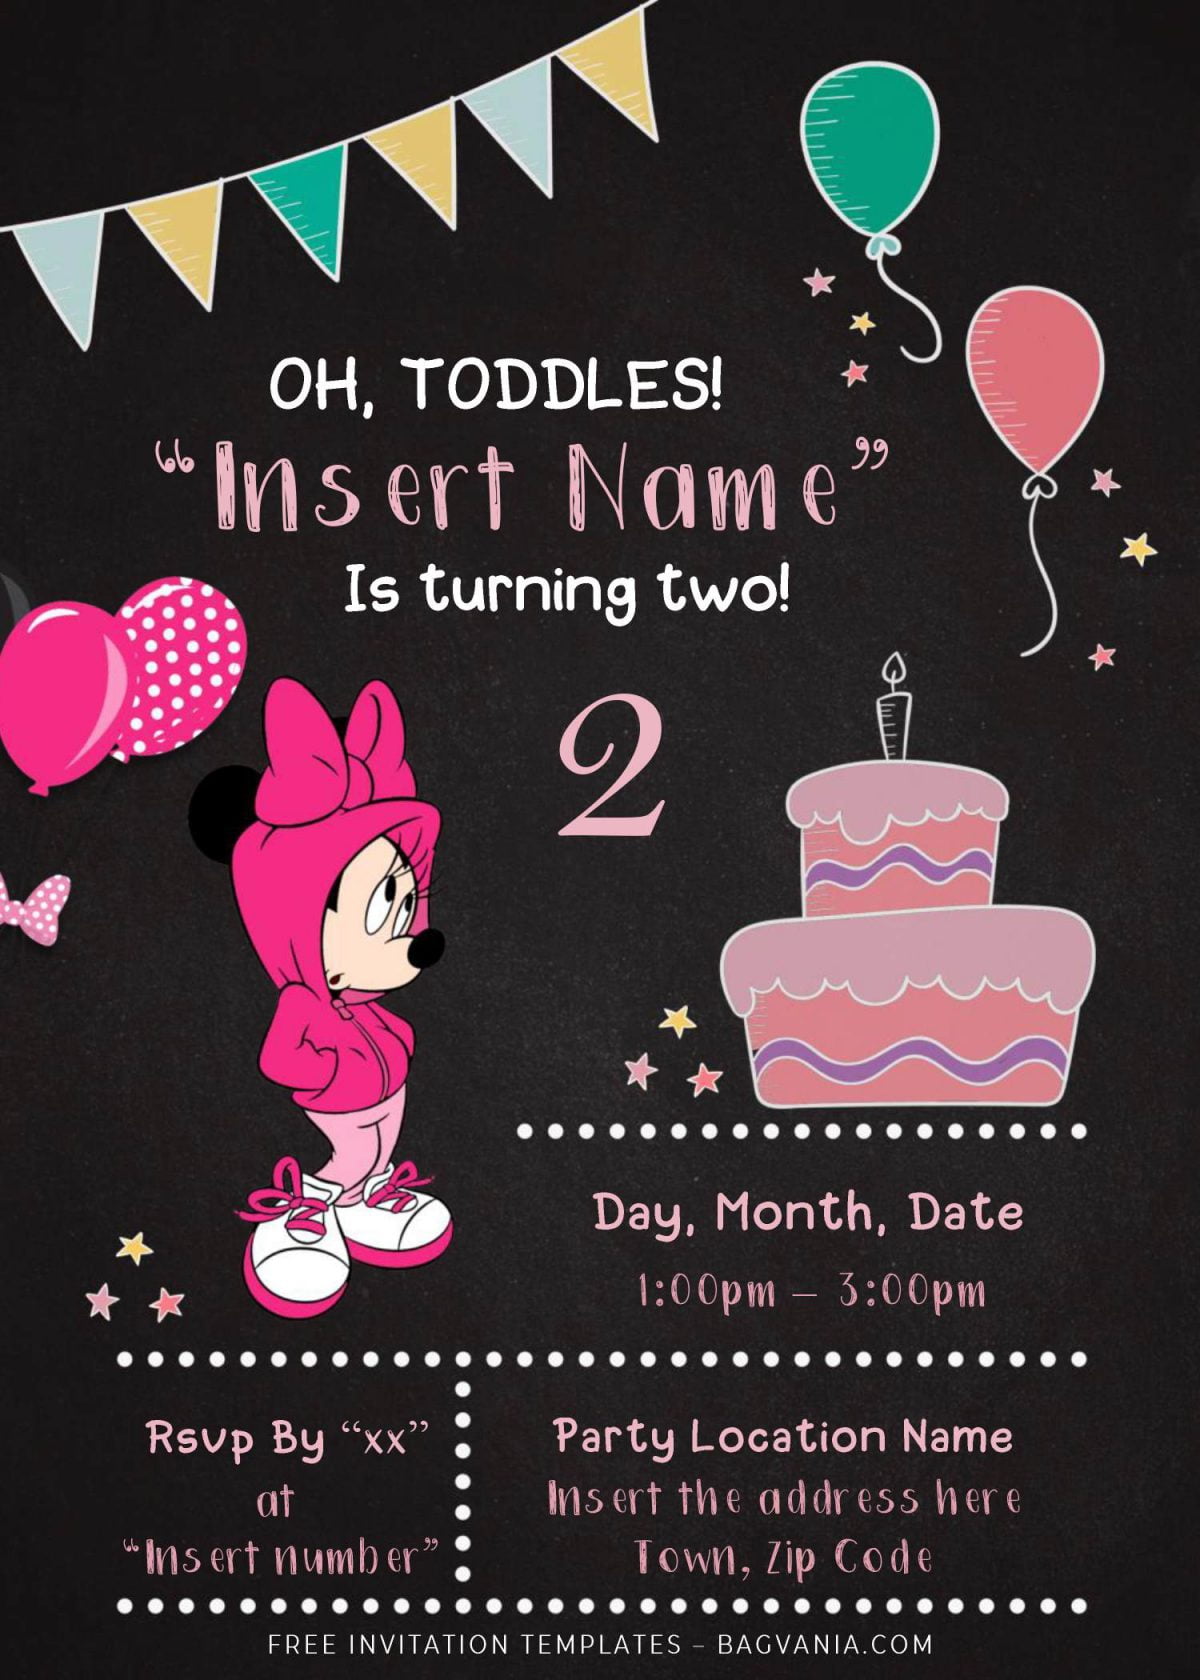 Free Minnie Mouse Chalkboard Birthday Invitation Templates For Word and has cute balloons and colorful bunting flags